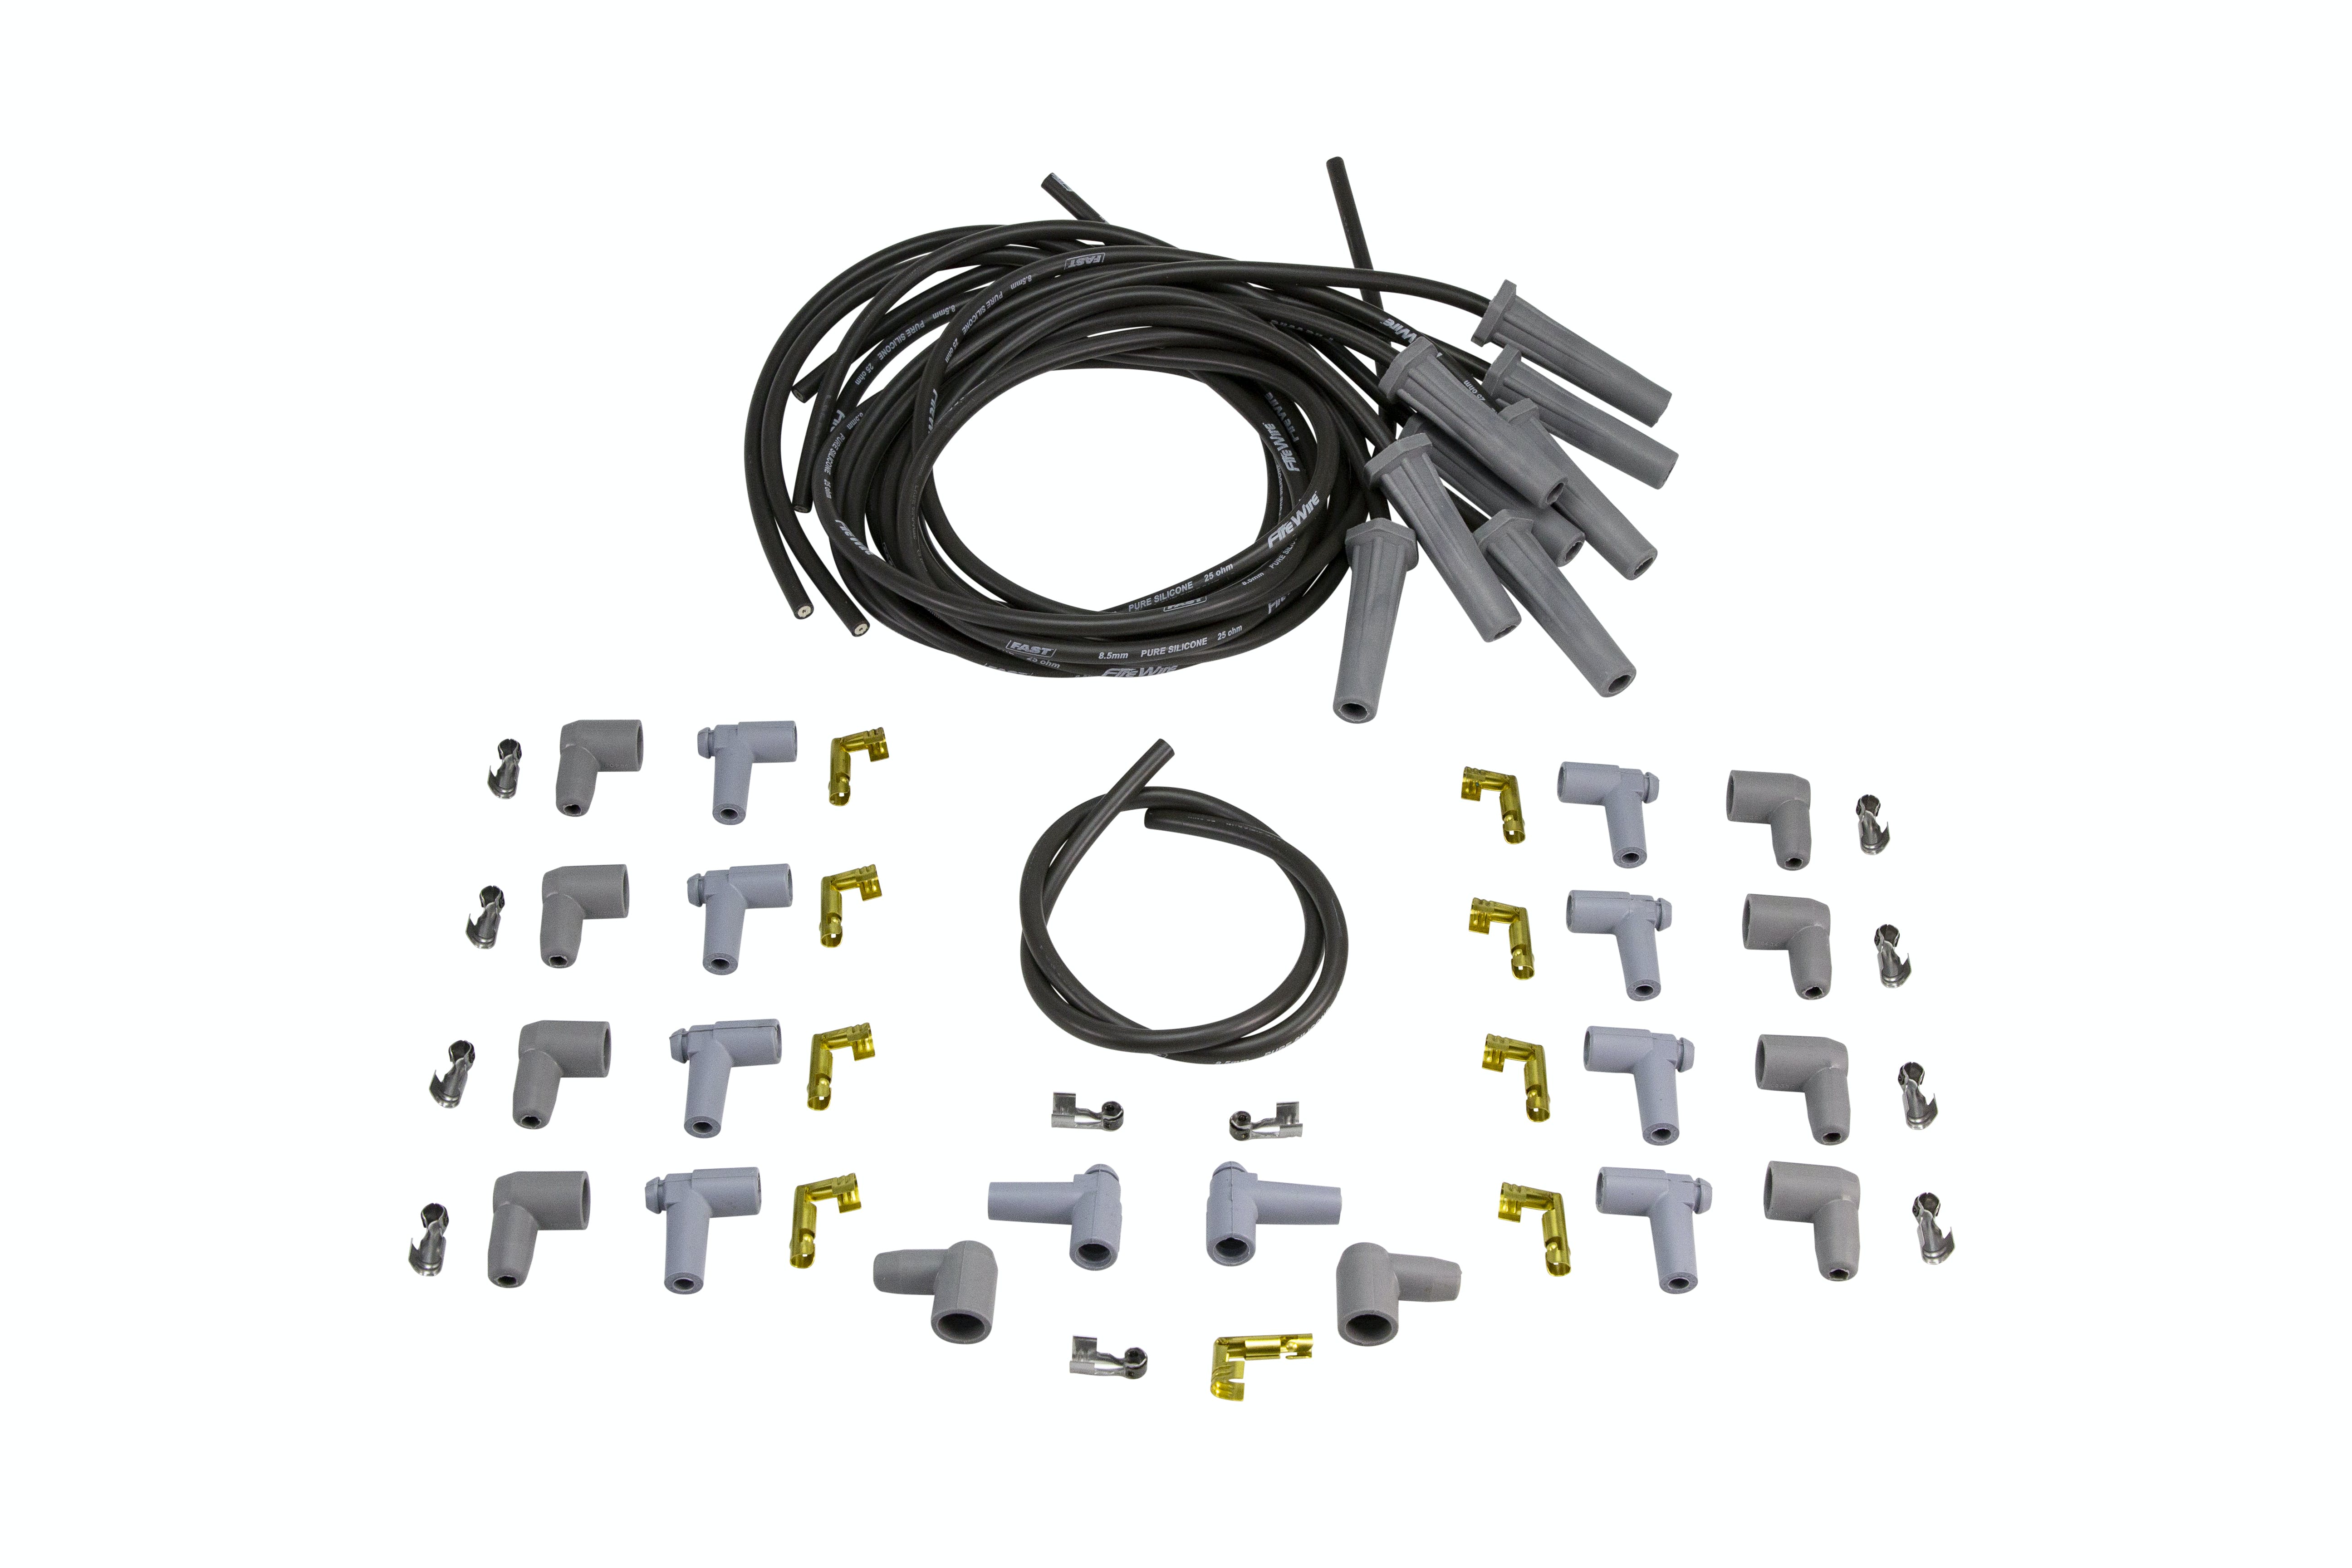 FAST - Fuel Air Spark Technology 255-0081 Cut-To-Fit 8 Cylinder Wireset